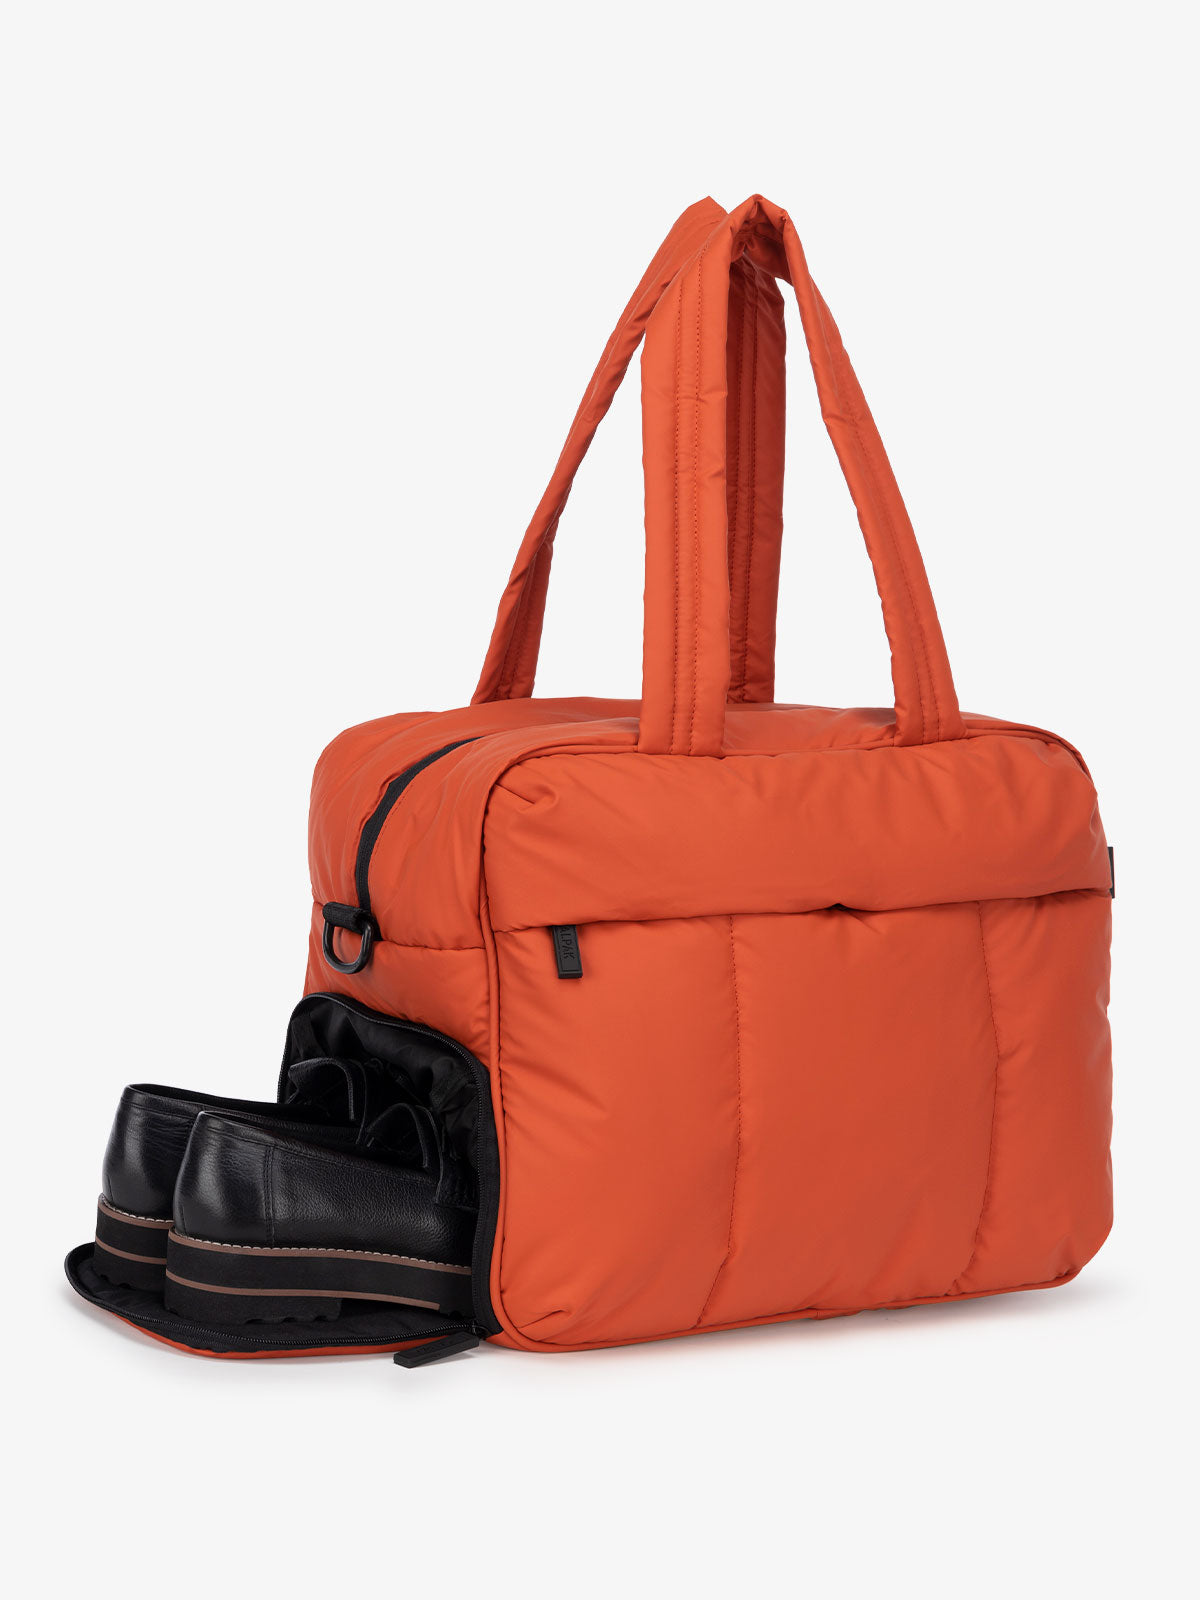 red orange duffle bag for travel with shoe compartment